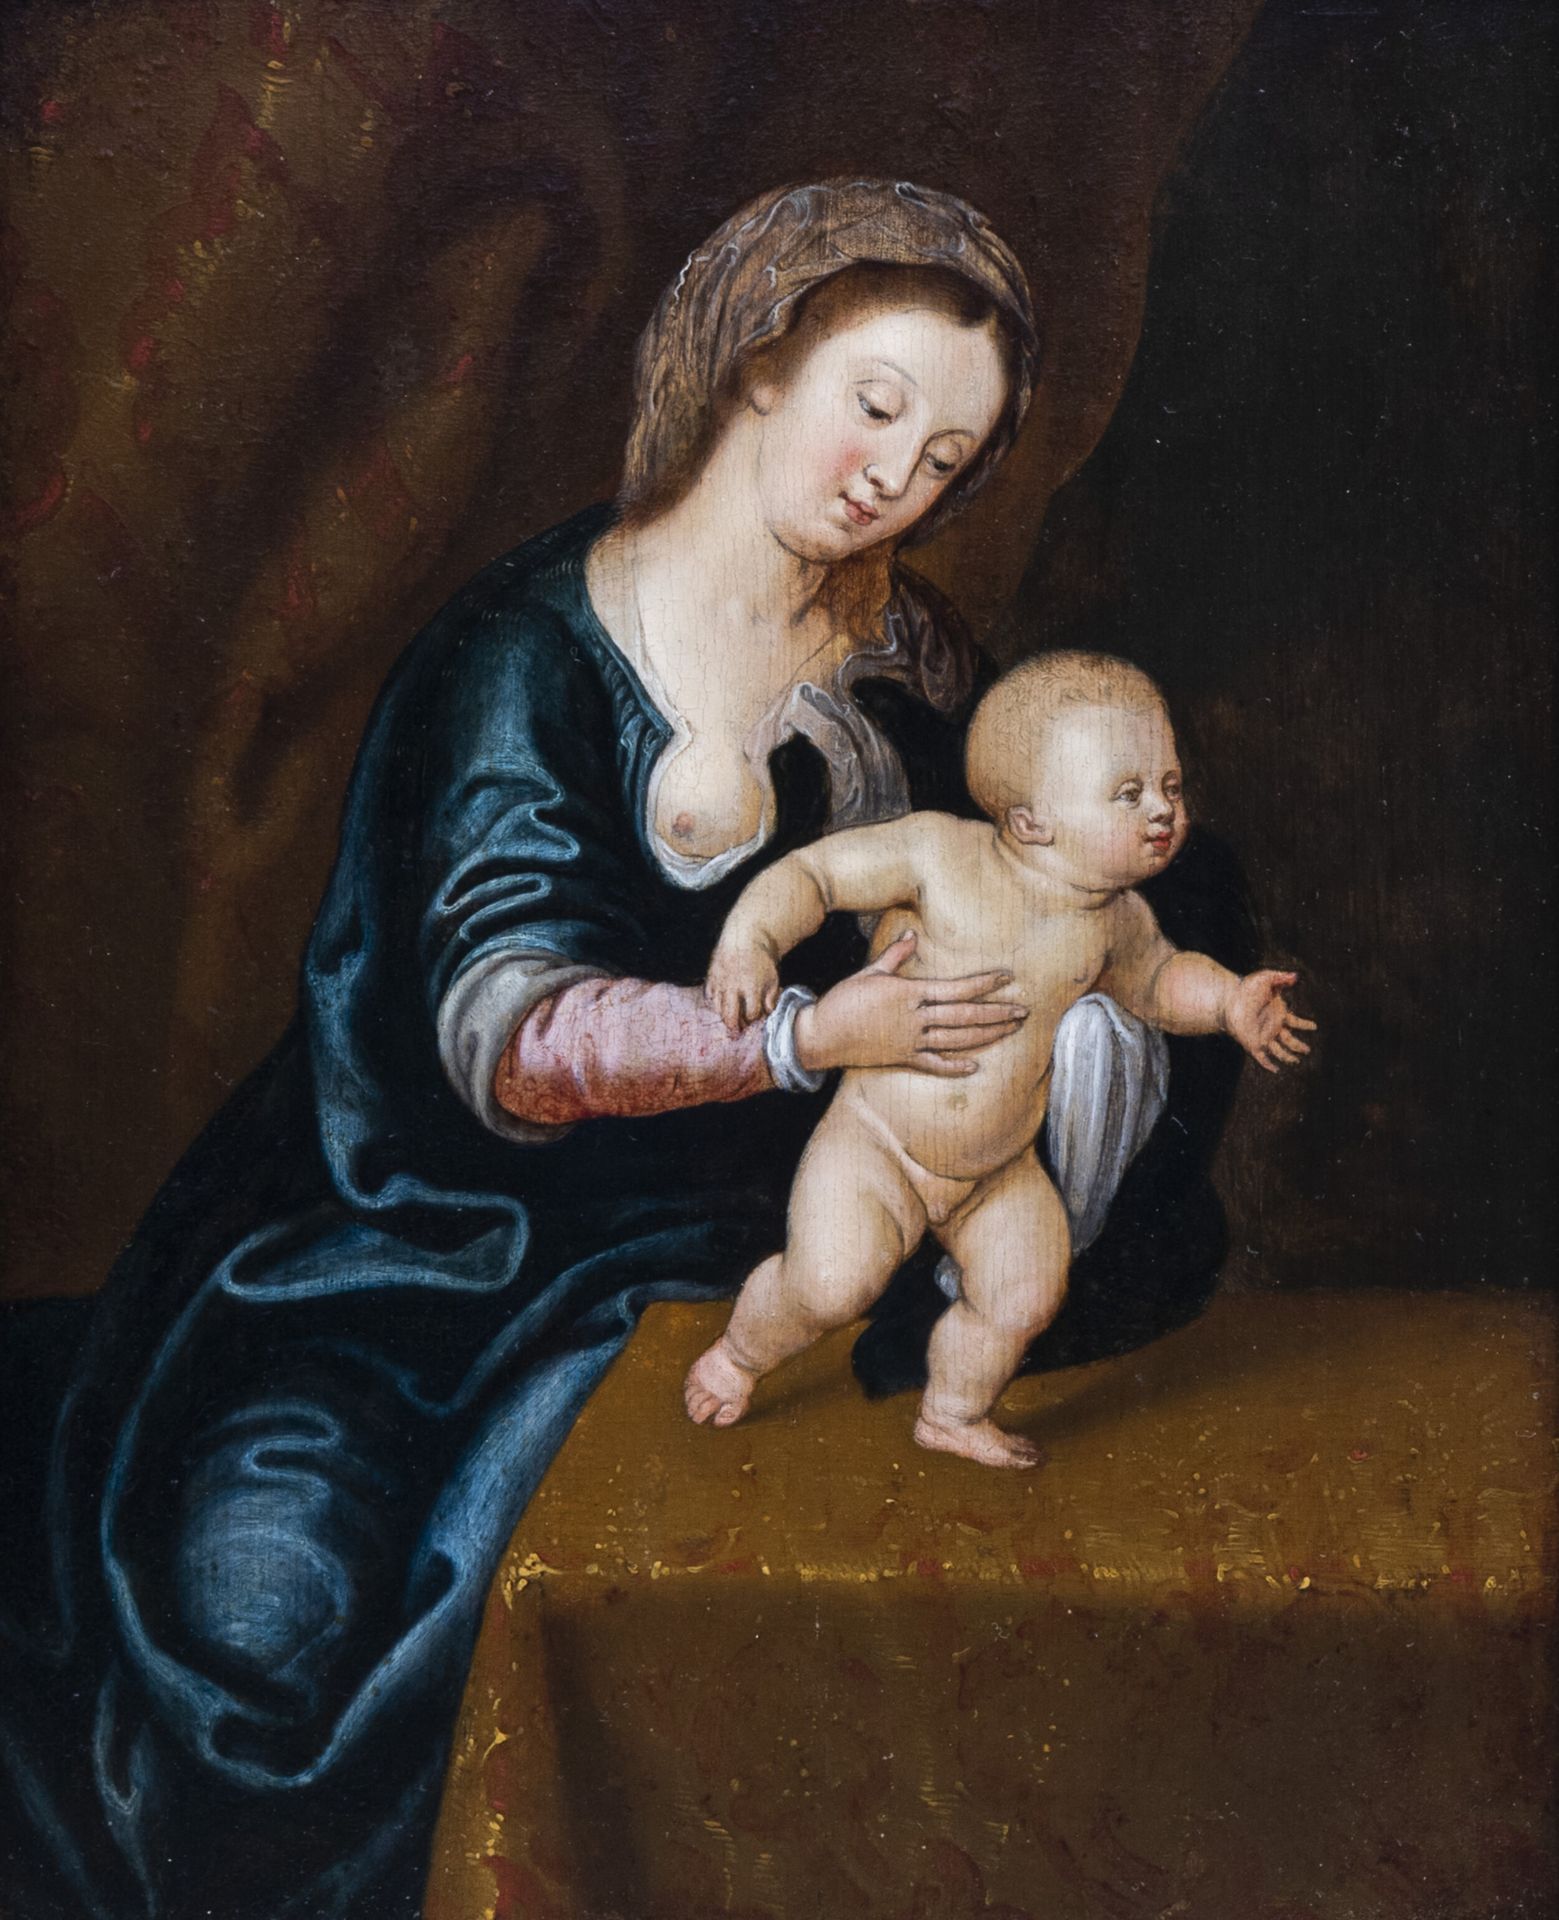 Flemish school, follower of Bernard van Orley (1490-1542): Our Lady and child, early 17th C.